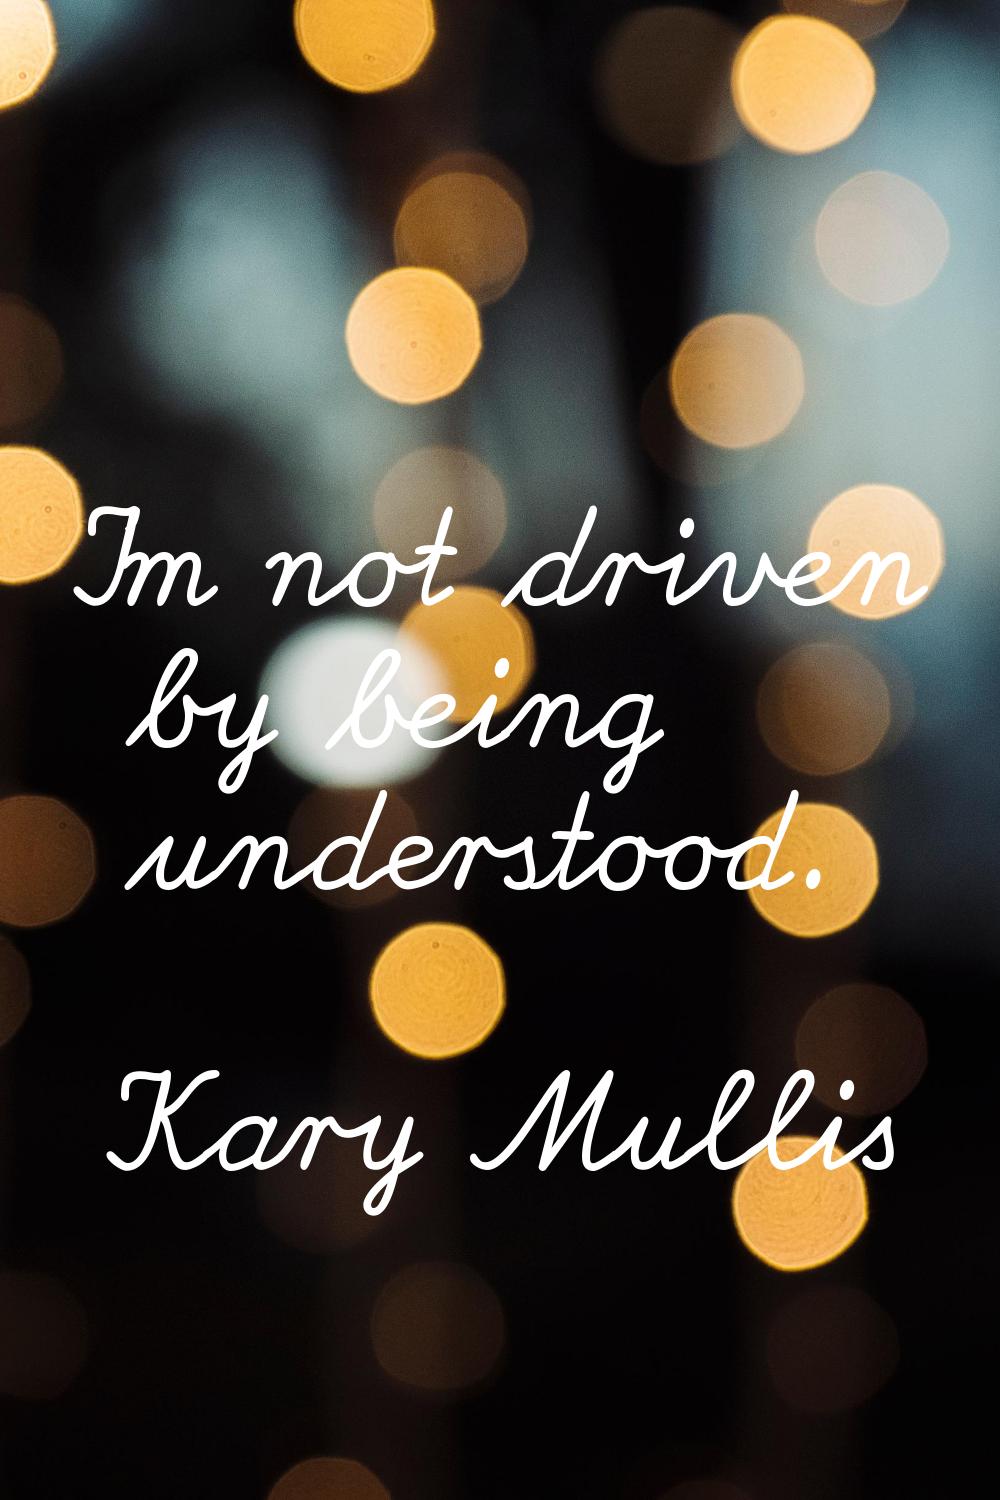 I'm not driven by being understood.